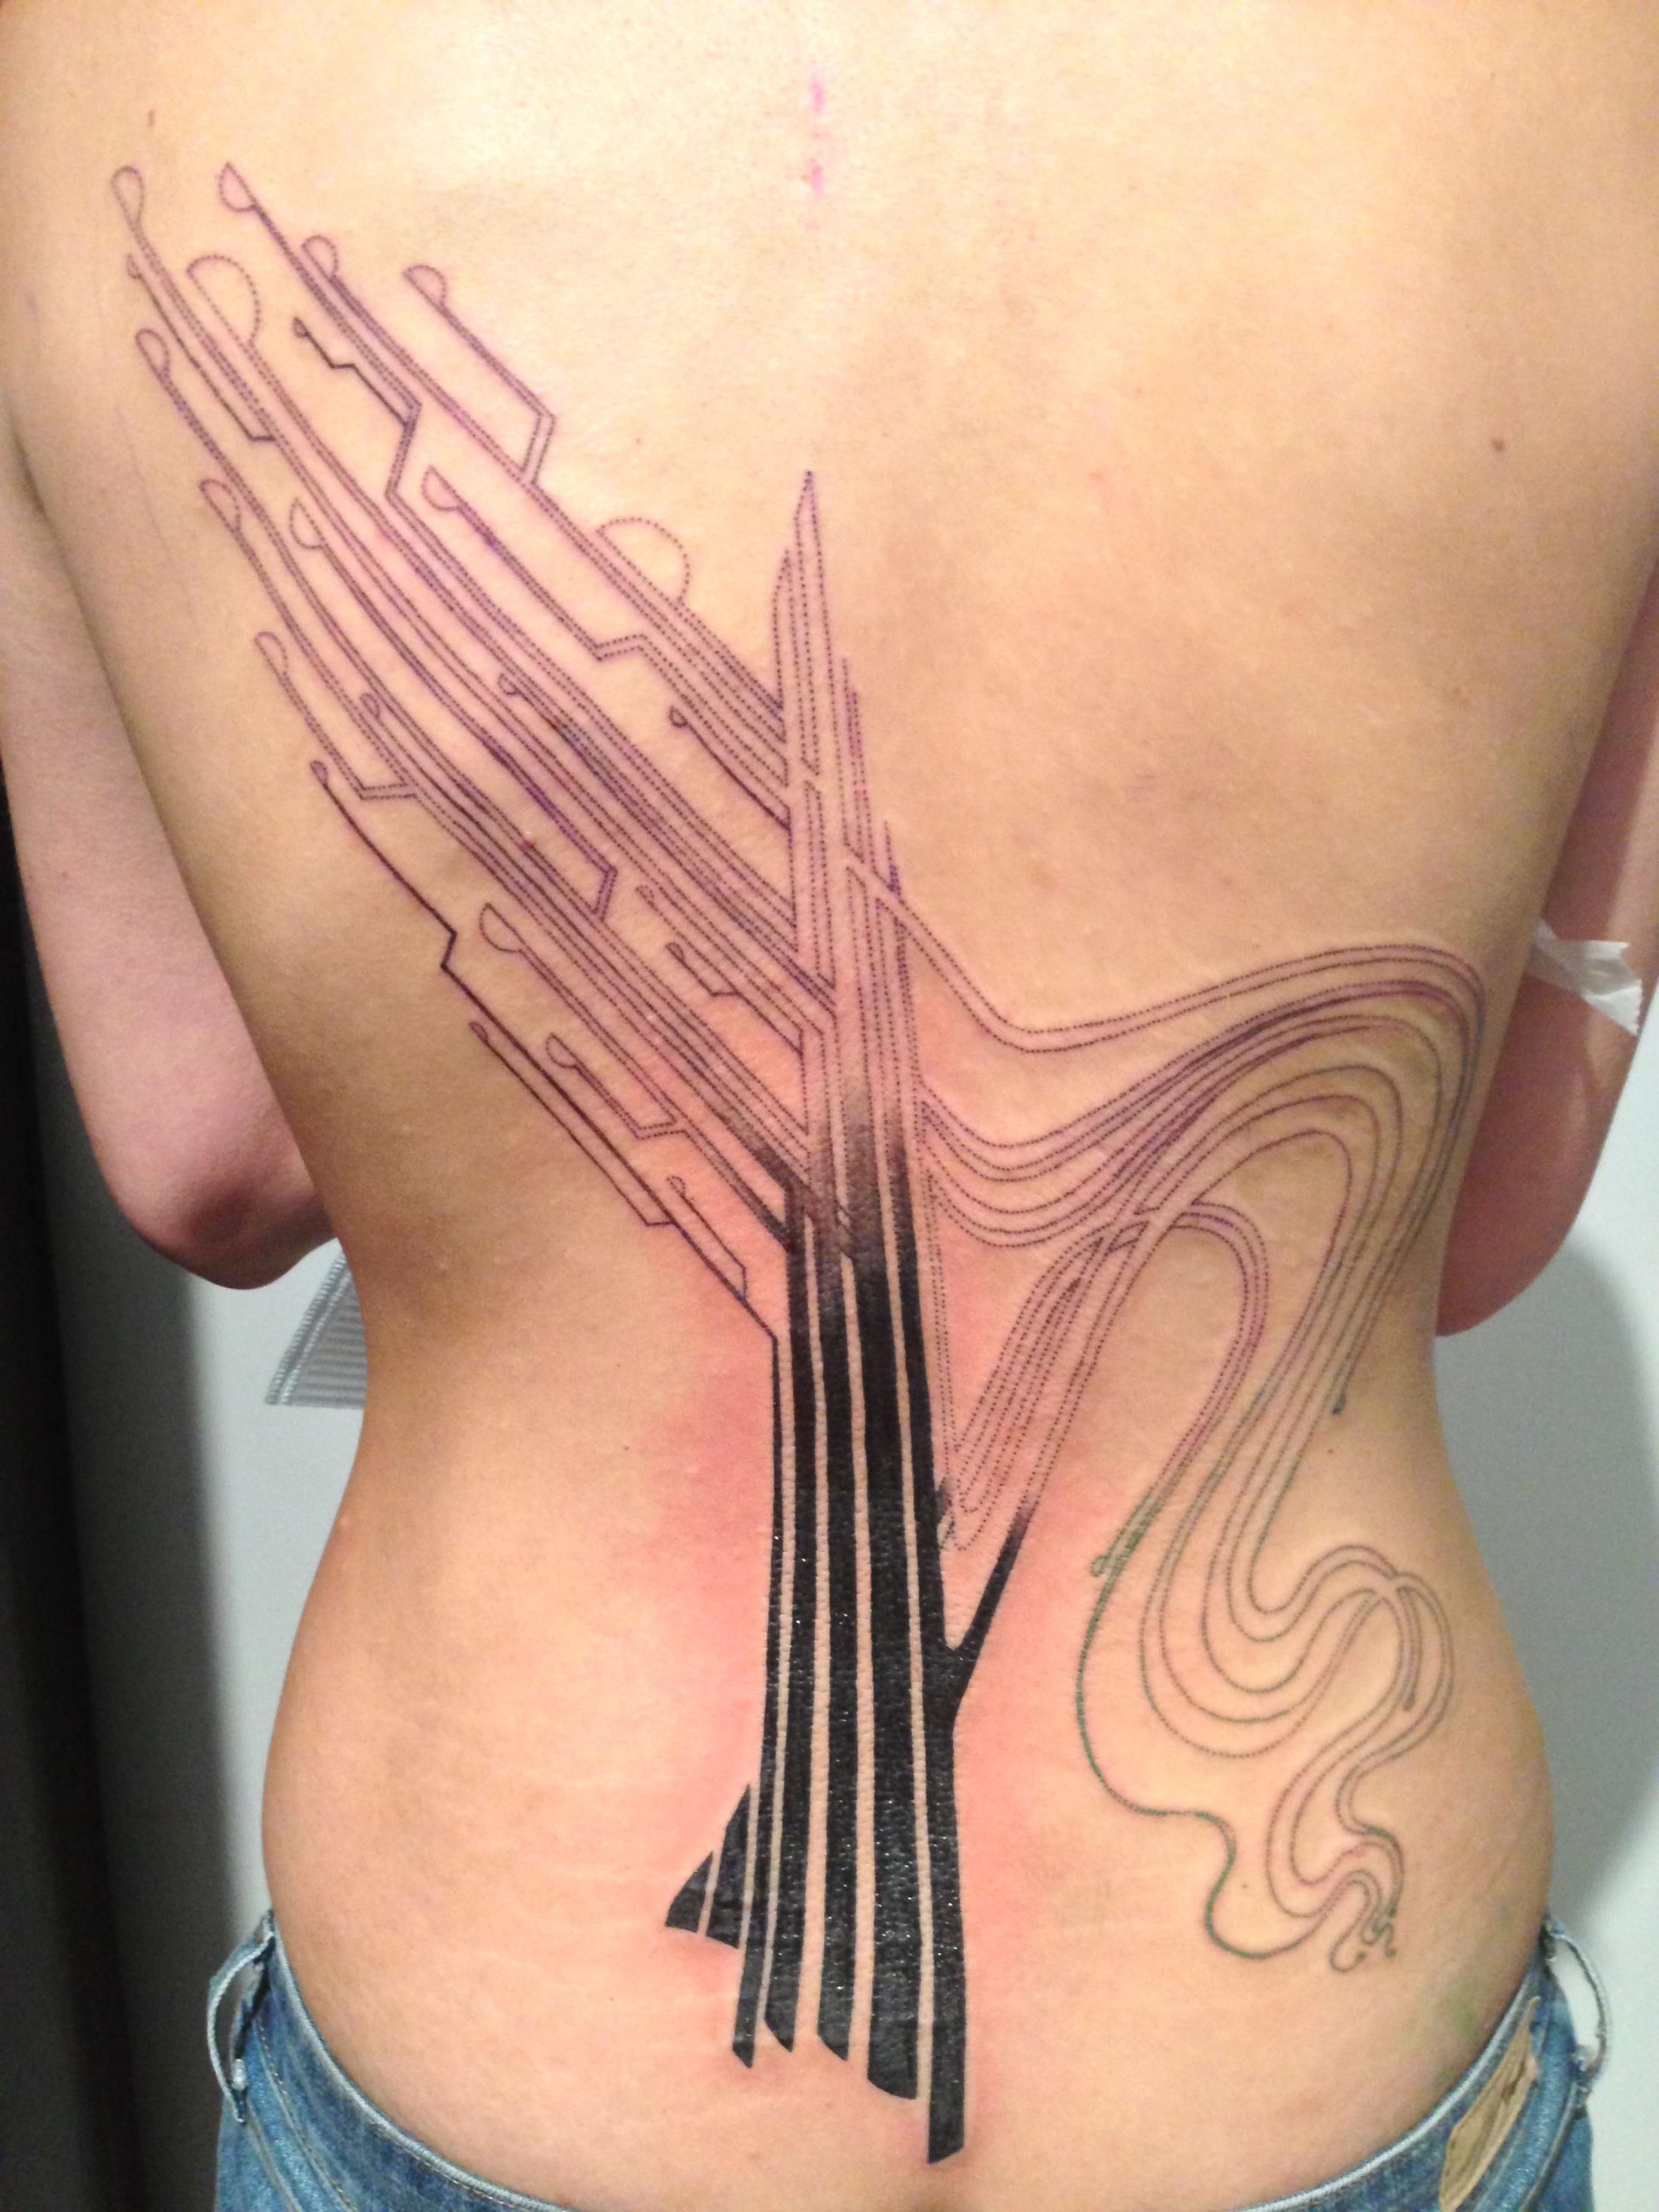 20 Best Tattoos of the Week – Oct 23th to Oct 30th, 2013 (1)